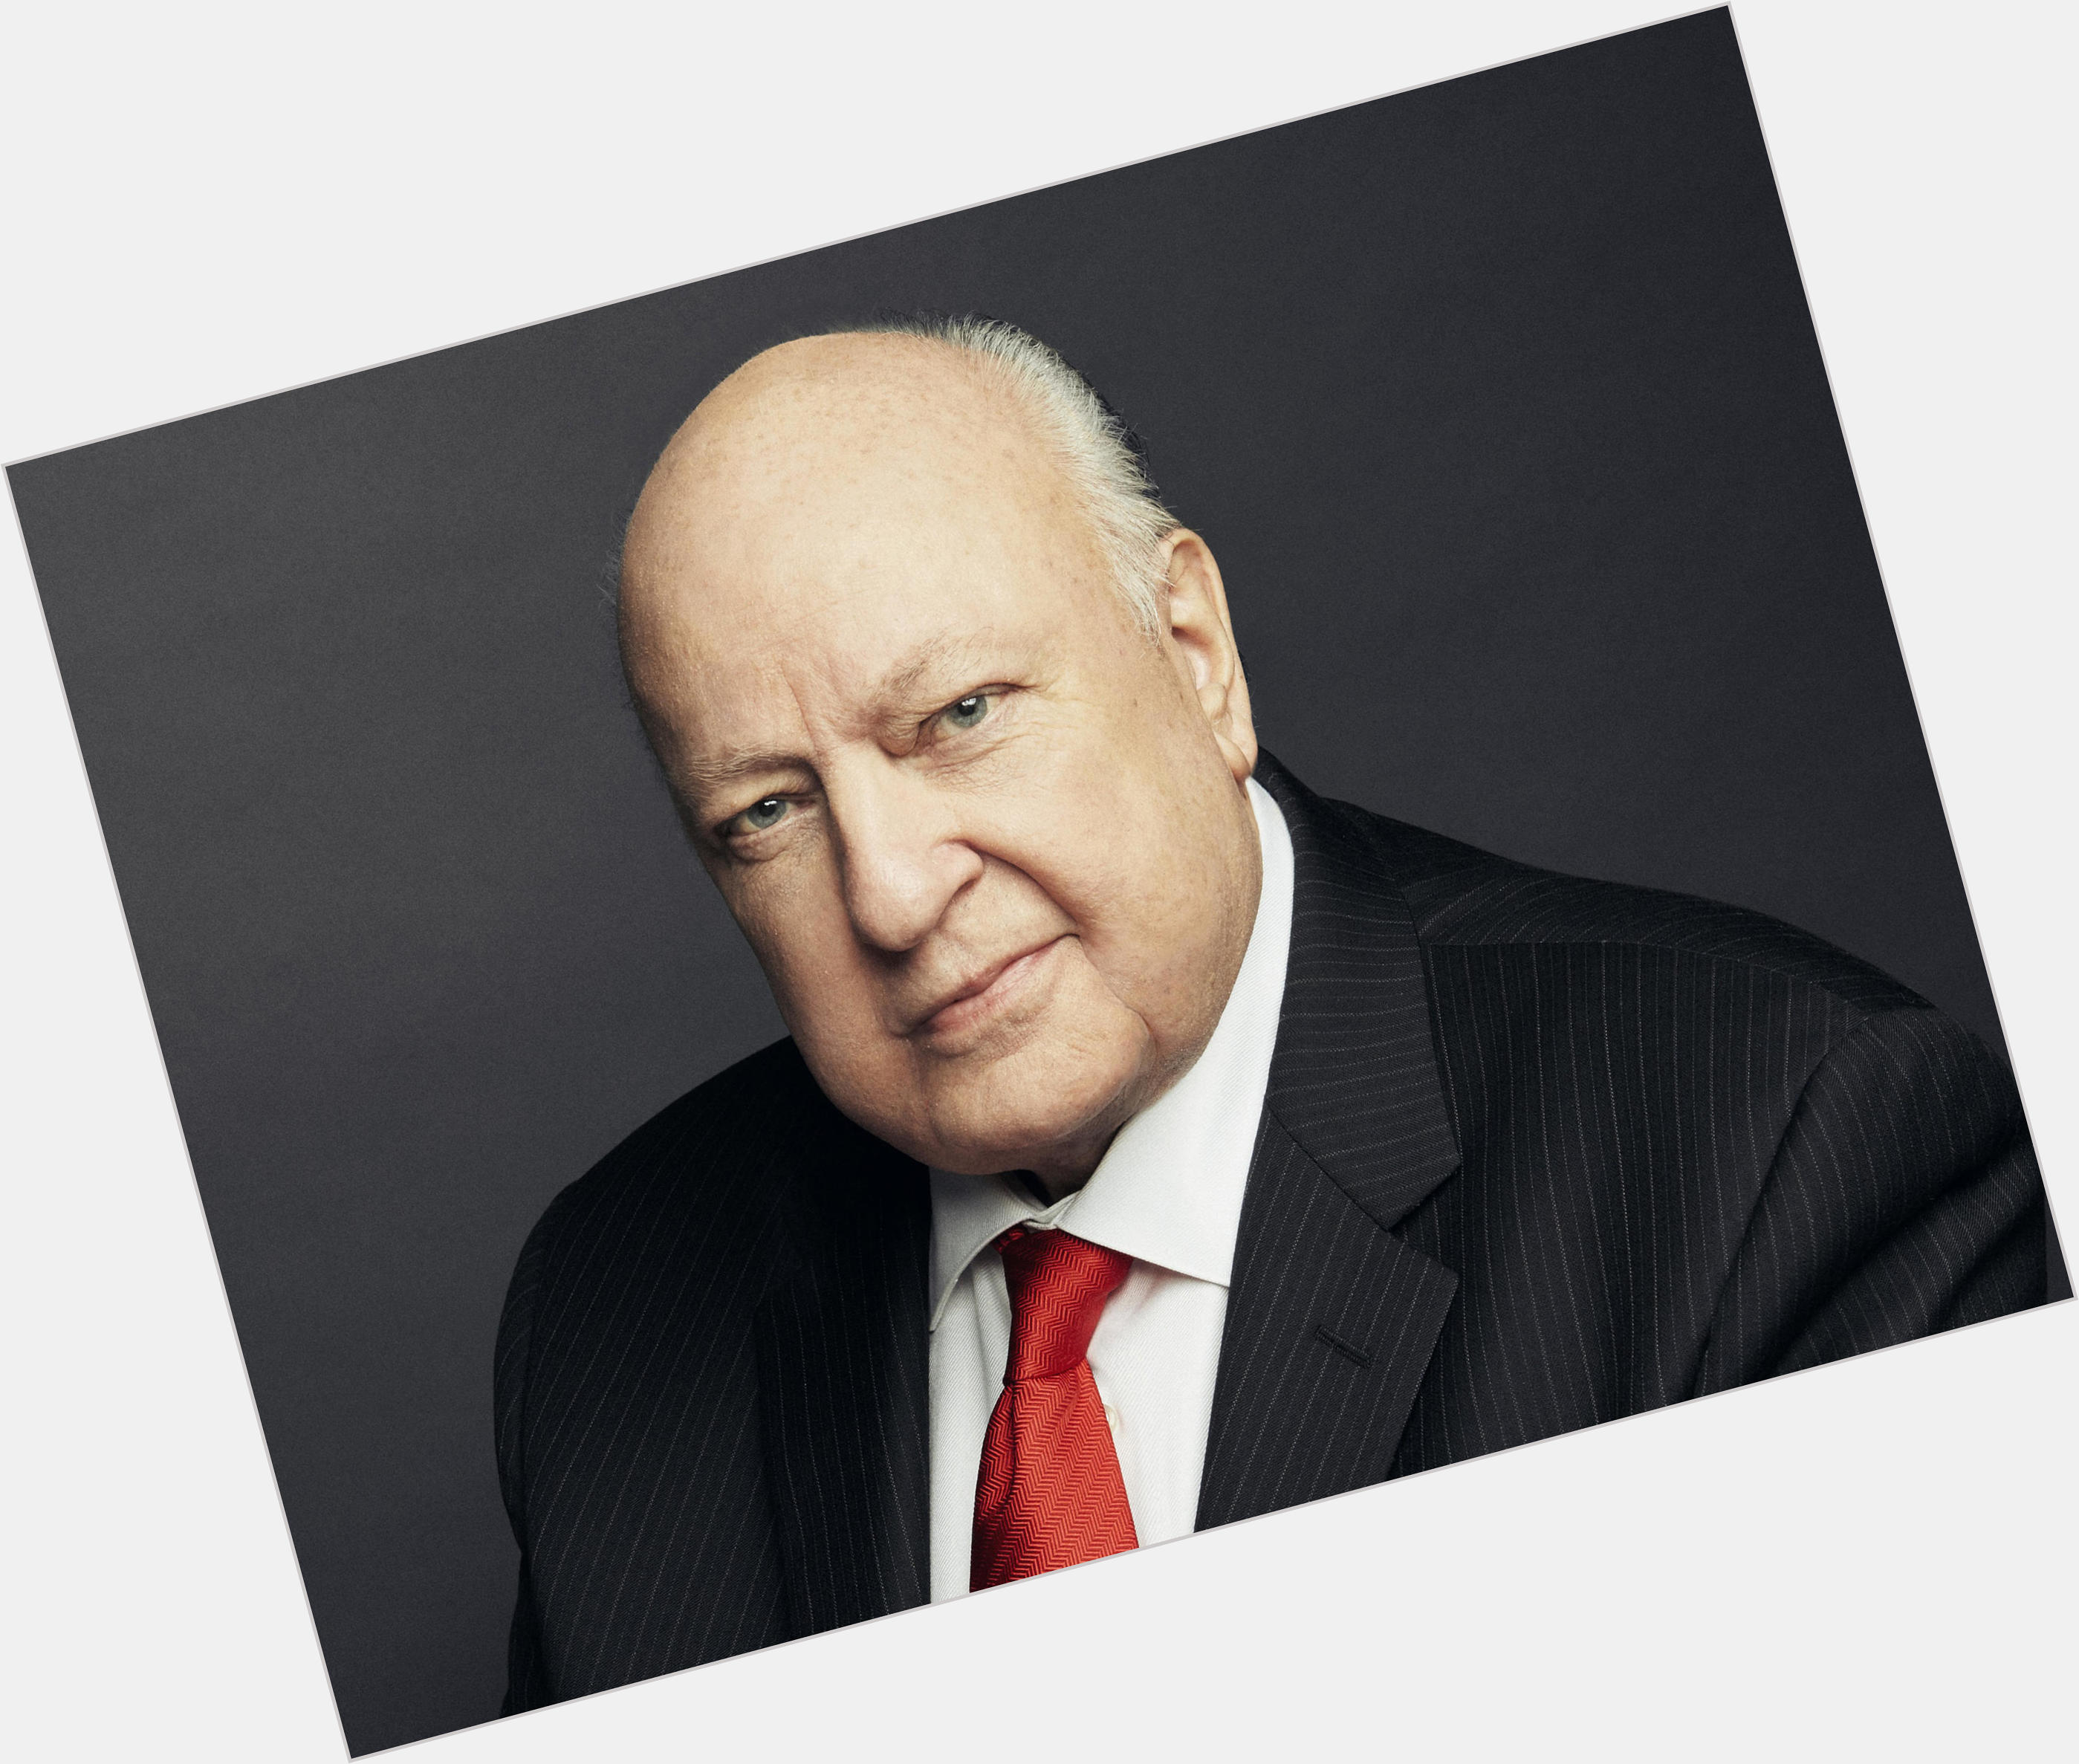 Roger Ailes Large body,  bald hair & hairstyles